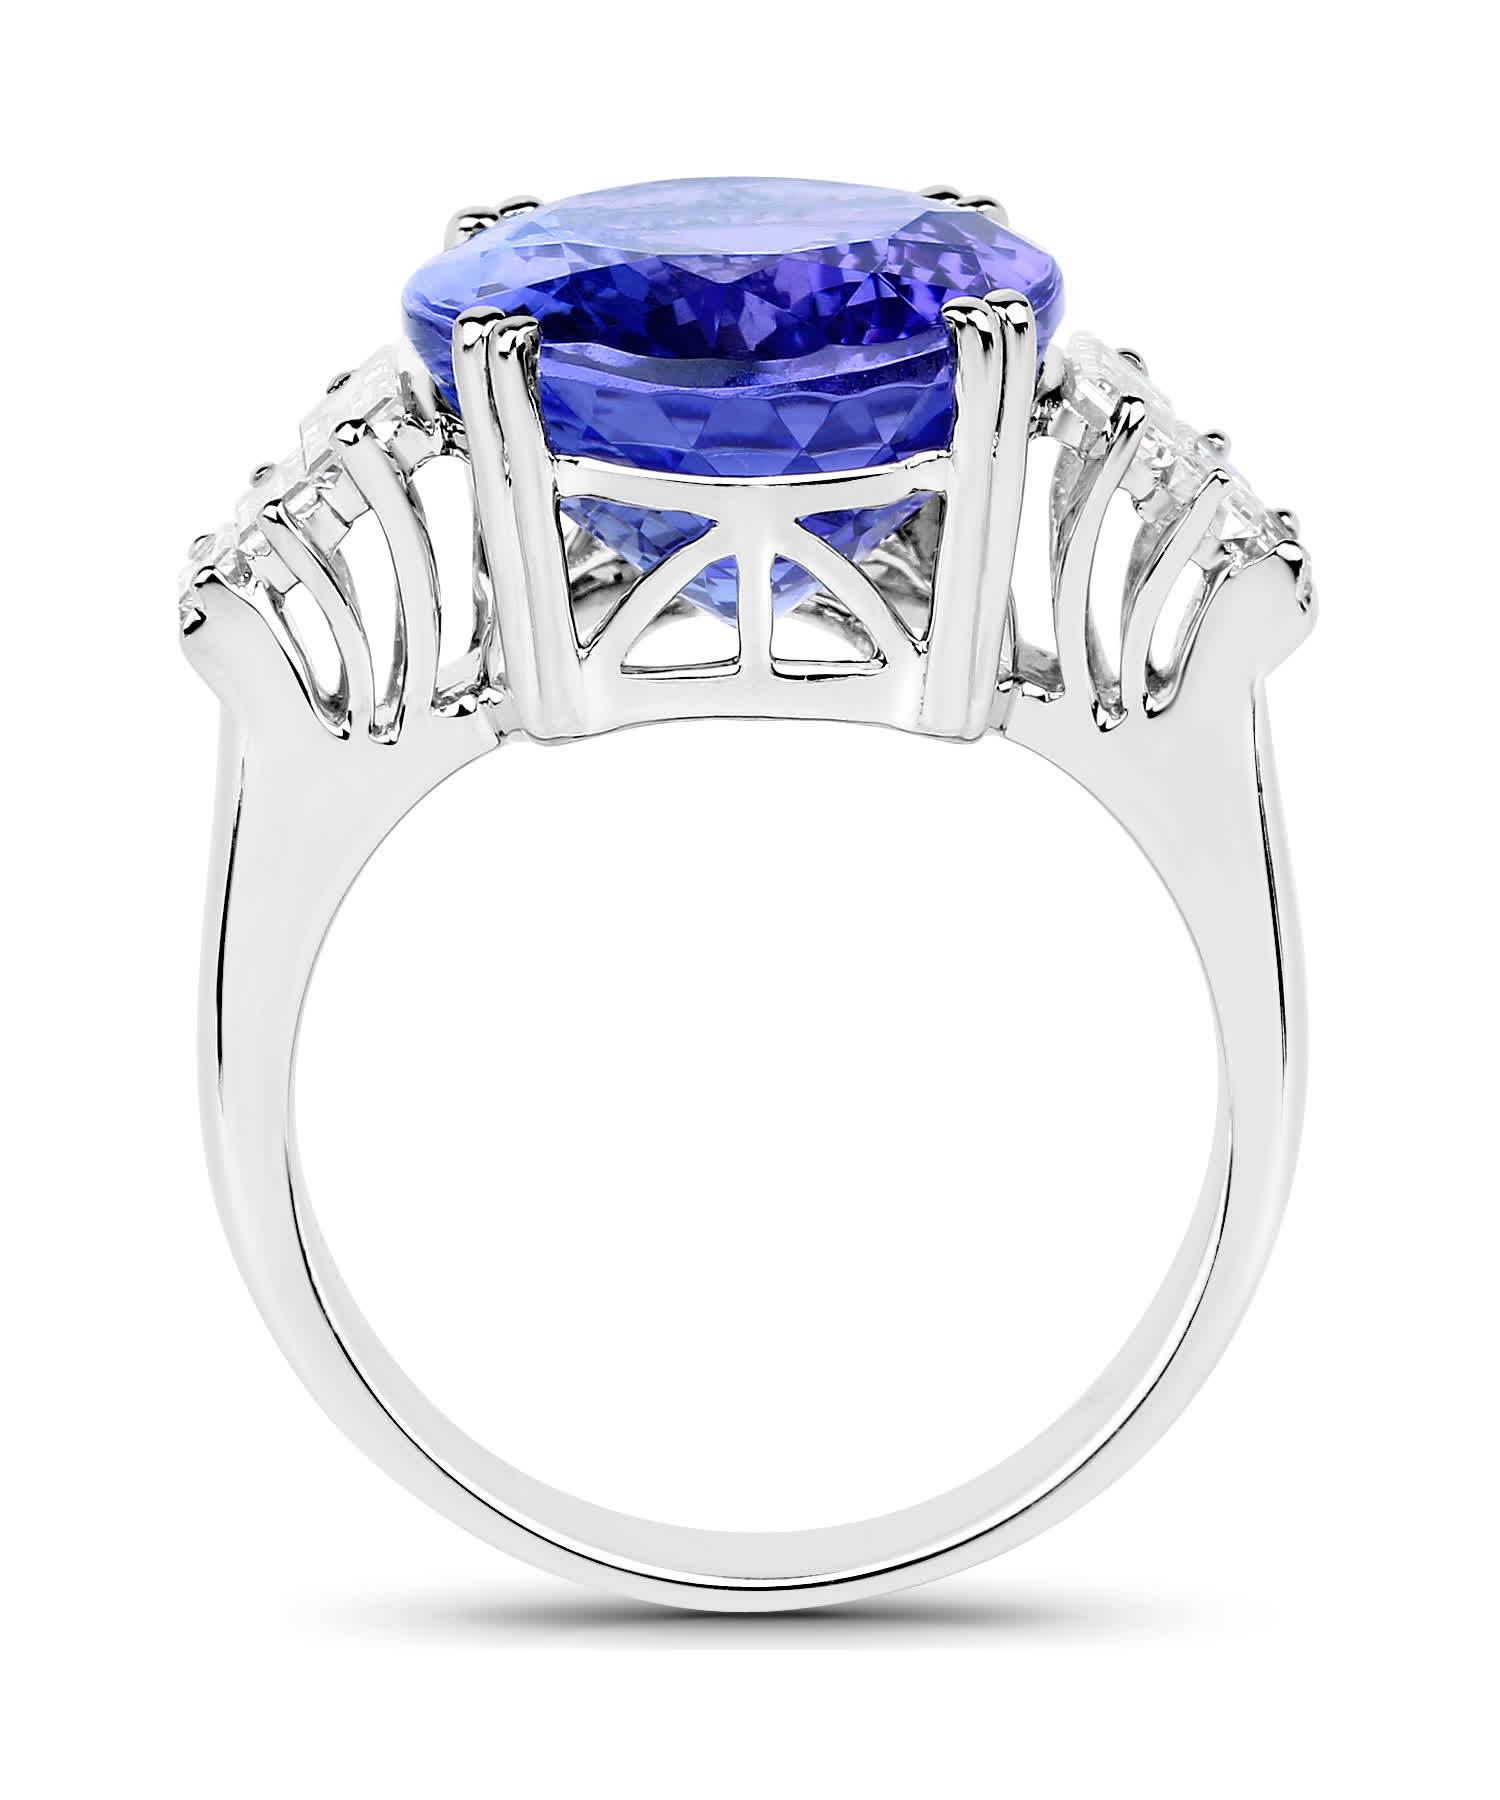 13.95ctw Natural Fine Tanzanite and Diamond 18k Gold Fashion Cocktail Ring View 2